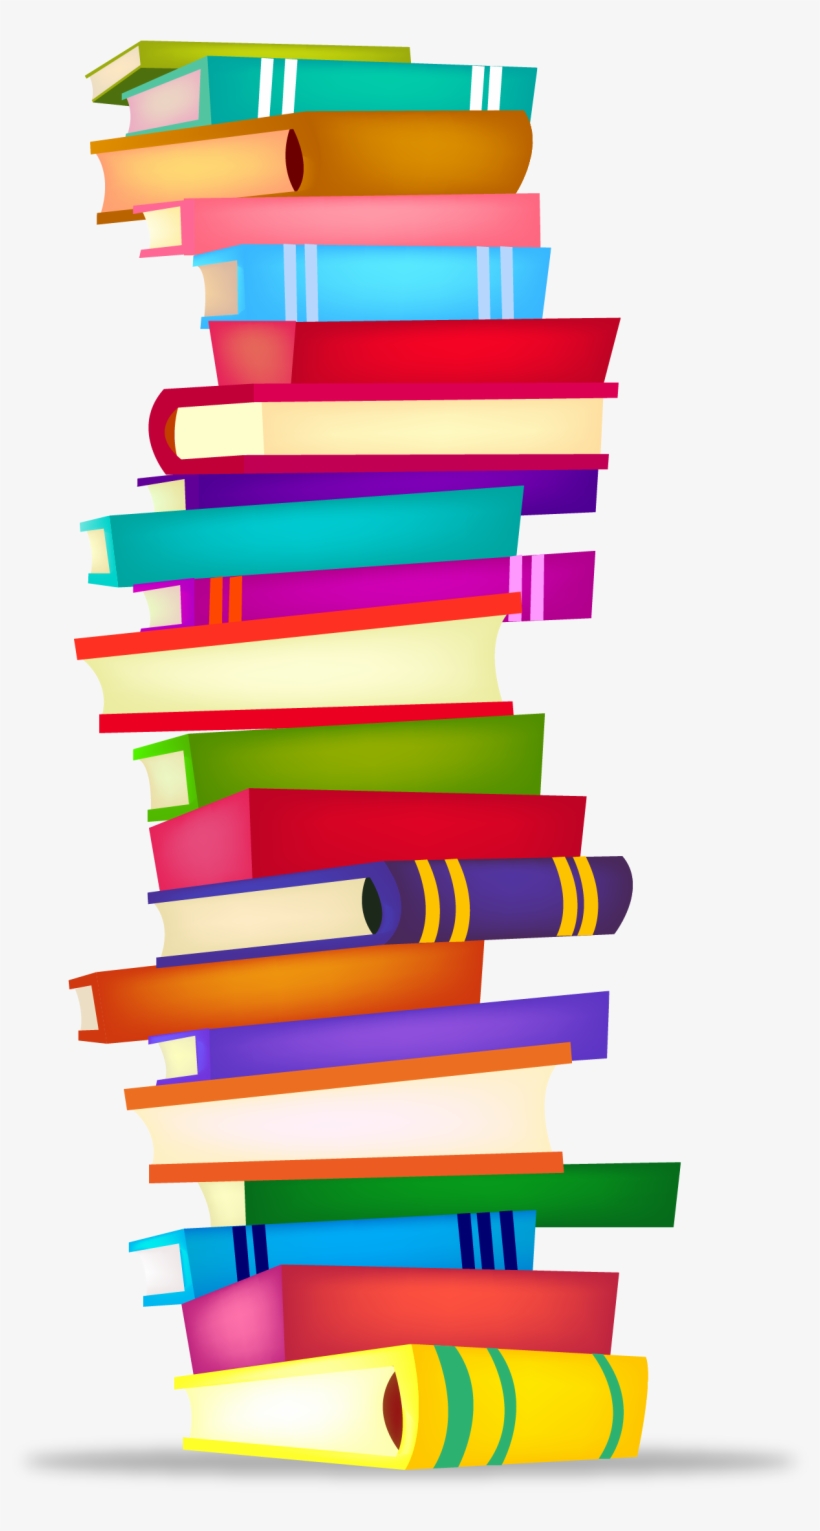 Stack books png.